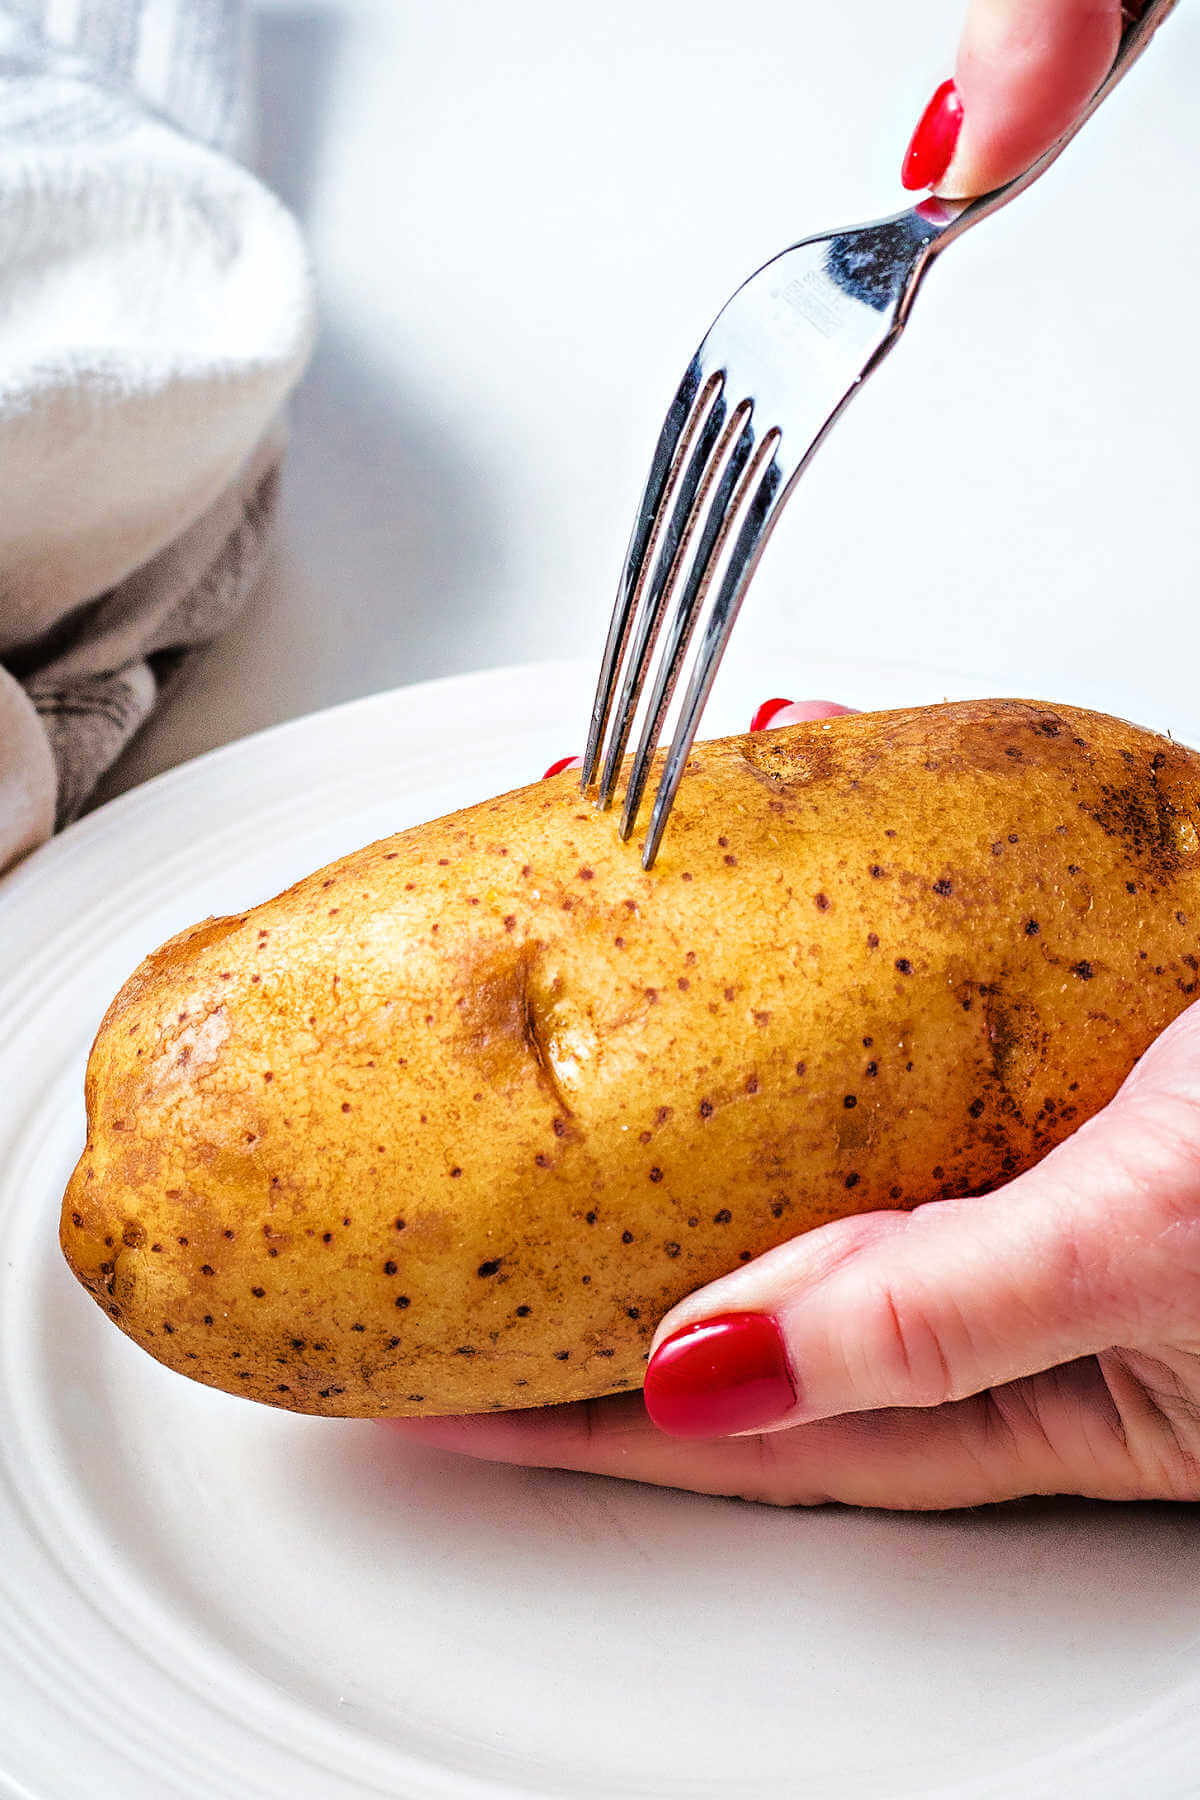 piercing a raw unpeeled potato with a fork.